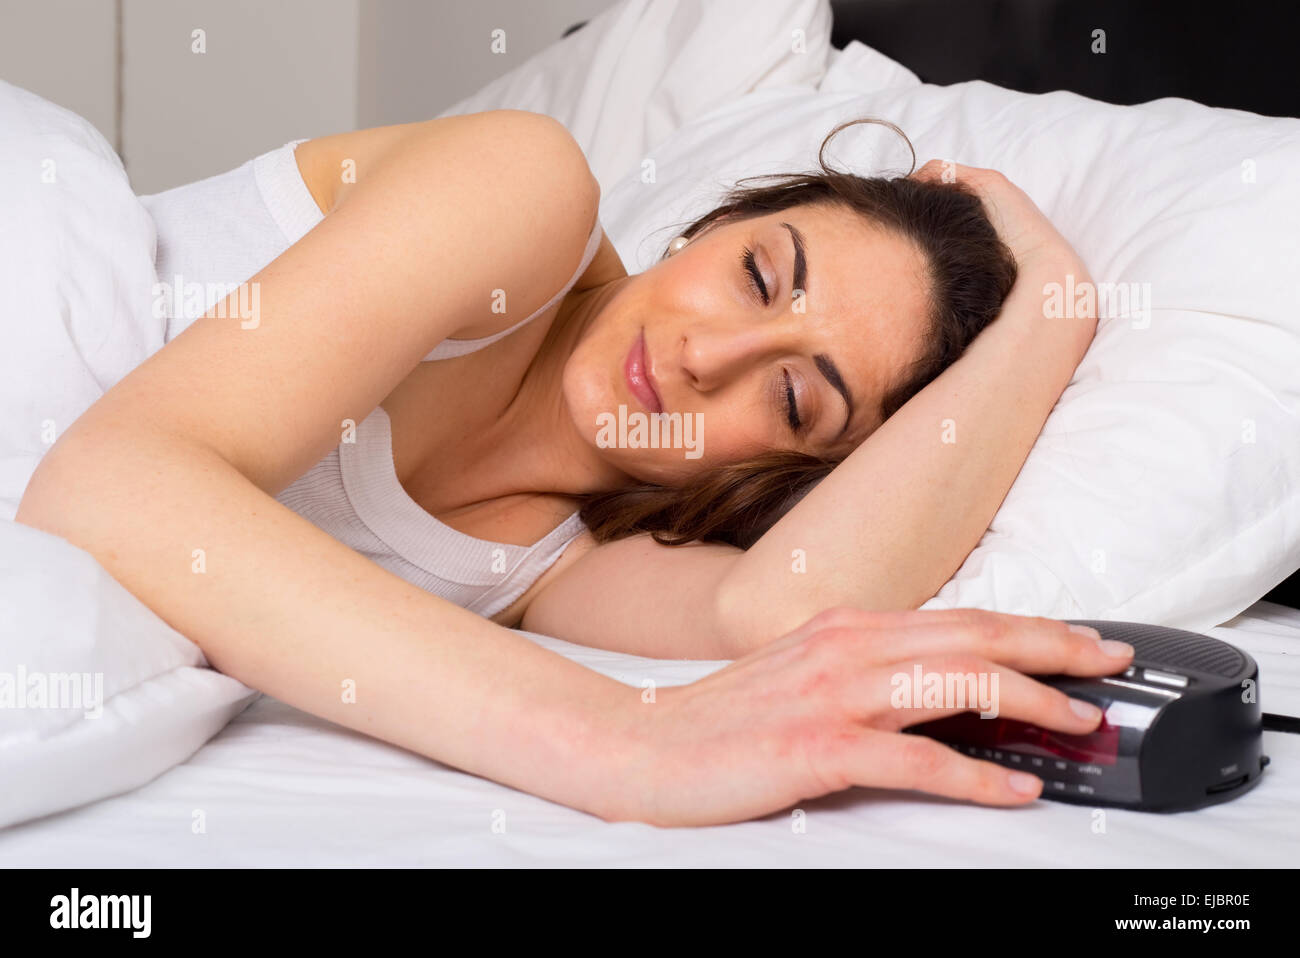 sleepy young woman switching off the alarm clock. Stock Photo